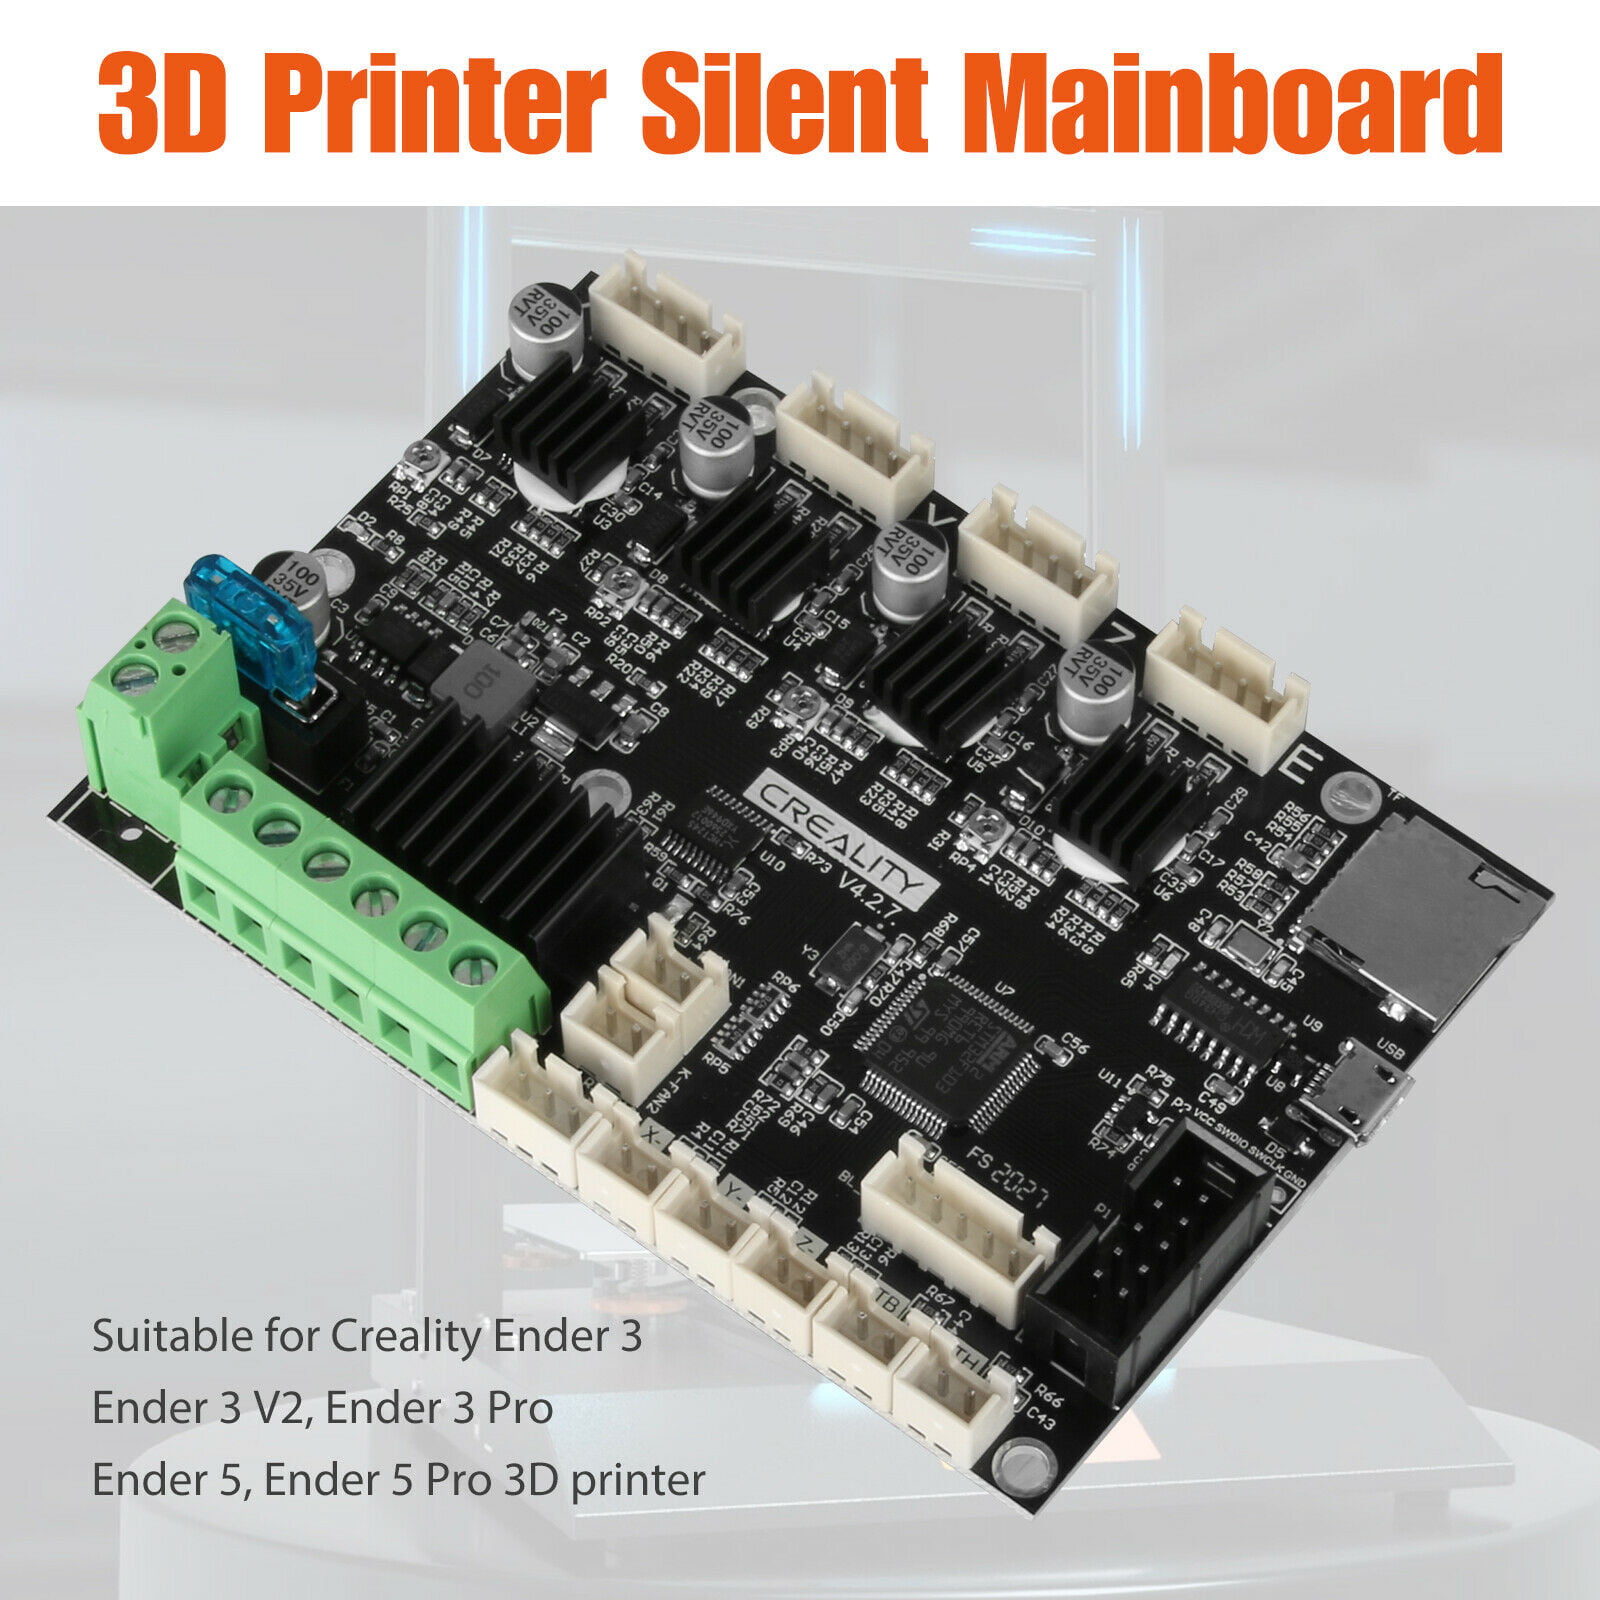 Creality 4.2.7 Silent Mainboard Upgrade,Mute Module for Enter 3 and Big Plastic Pulley Wheel for 3D Printer